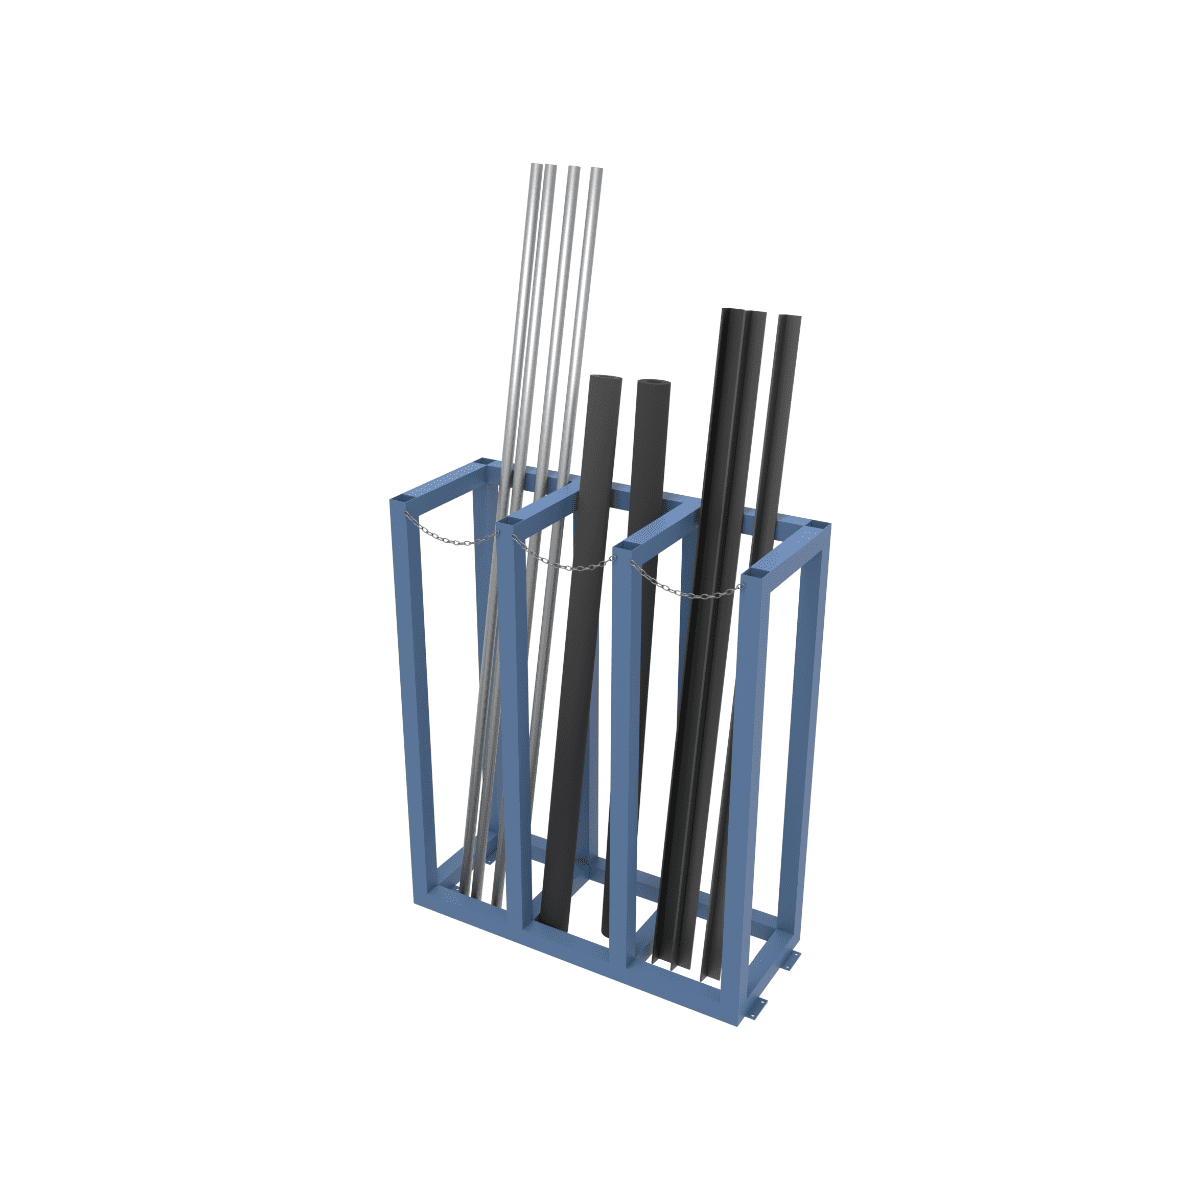  Heavy Duty Vertical Storage Racking featuring pipes, rods & longer length products 